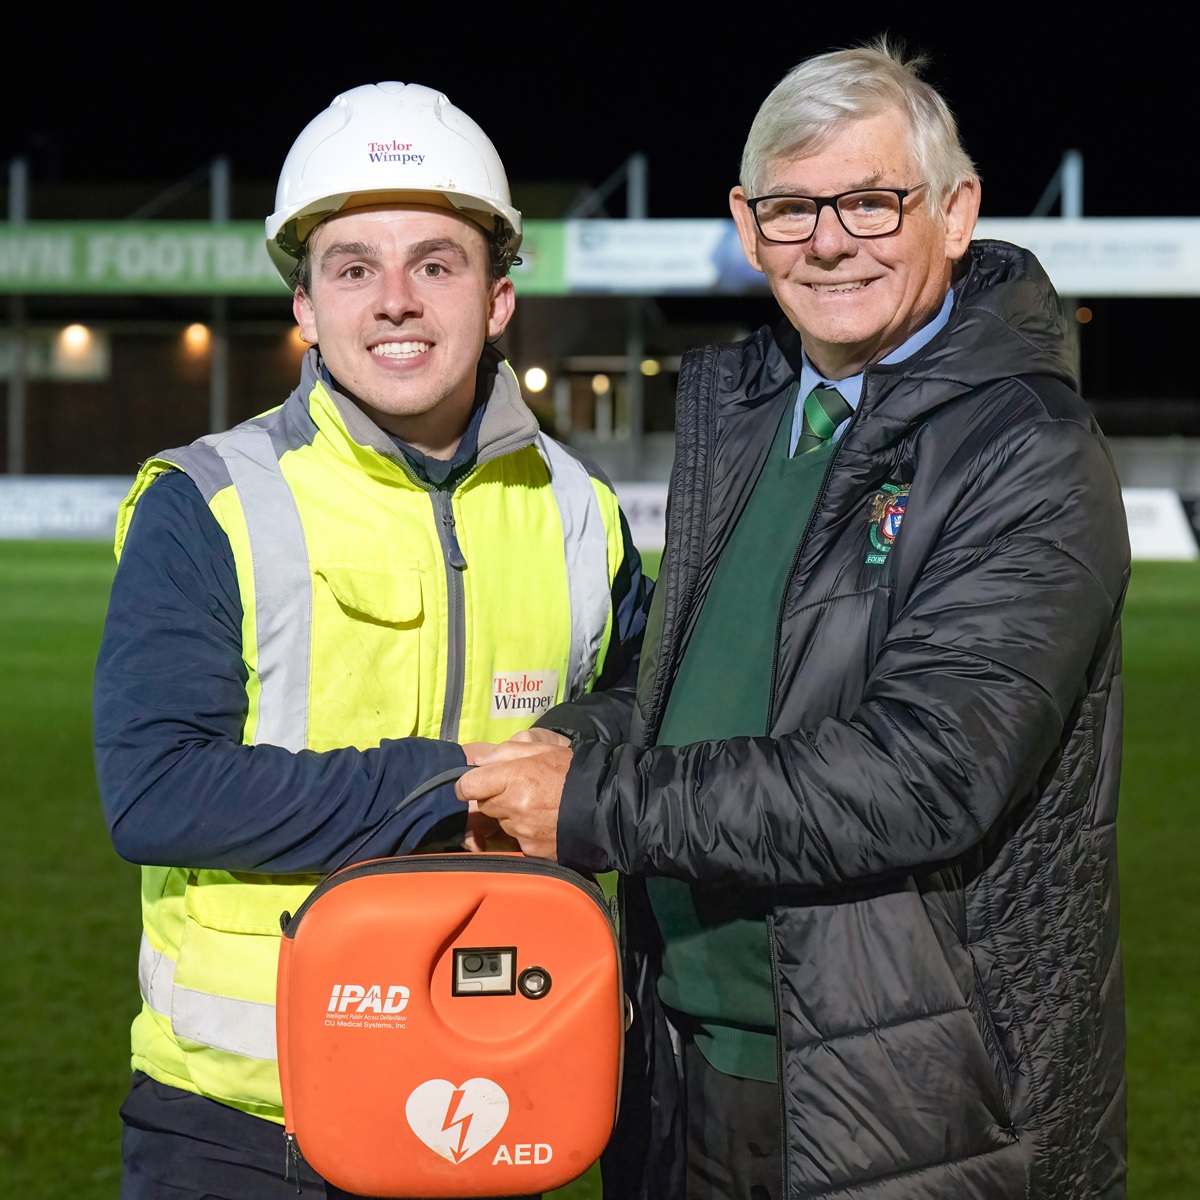 In partnership with @TheBHF, we donated a life-saving defibrillator to @rocks1883 to help people who suffer from out-of-hospital cardiac arrests. It’s part of our wider commitment to donating defibrillators to communities across the UK. Read more: twimpey.tw/rxjs50Qbbgh